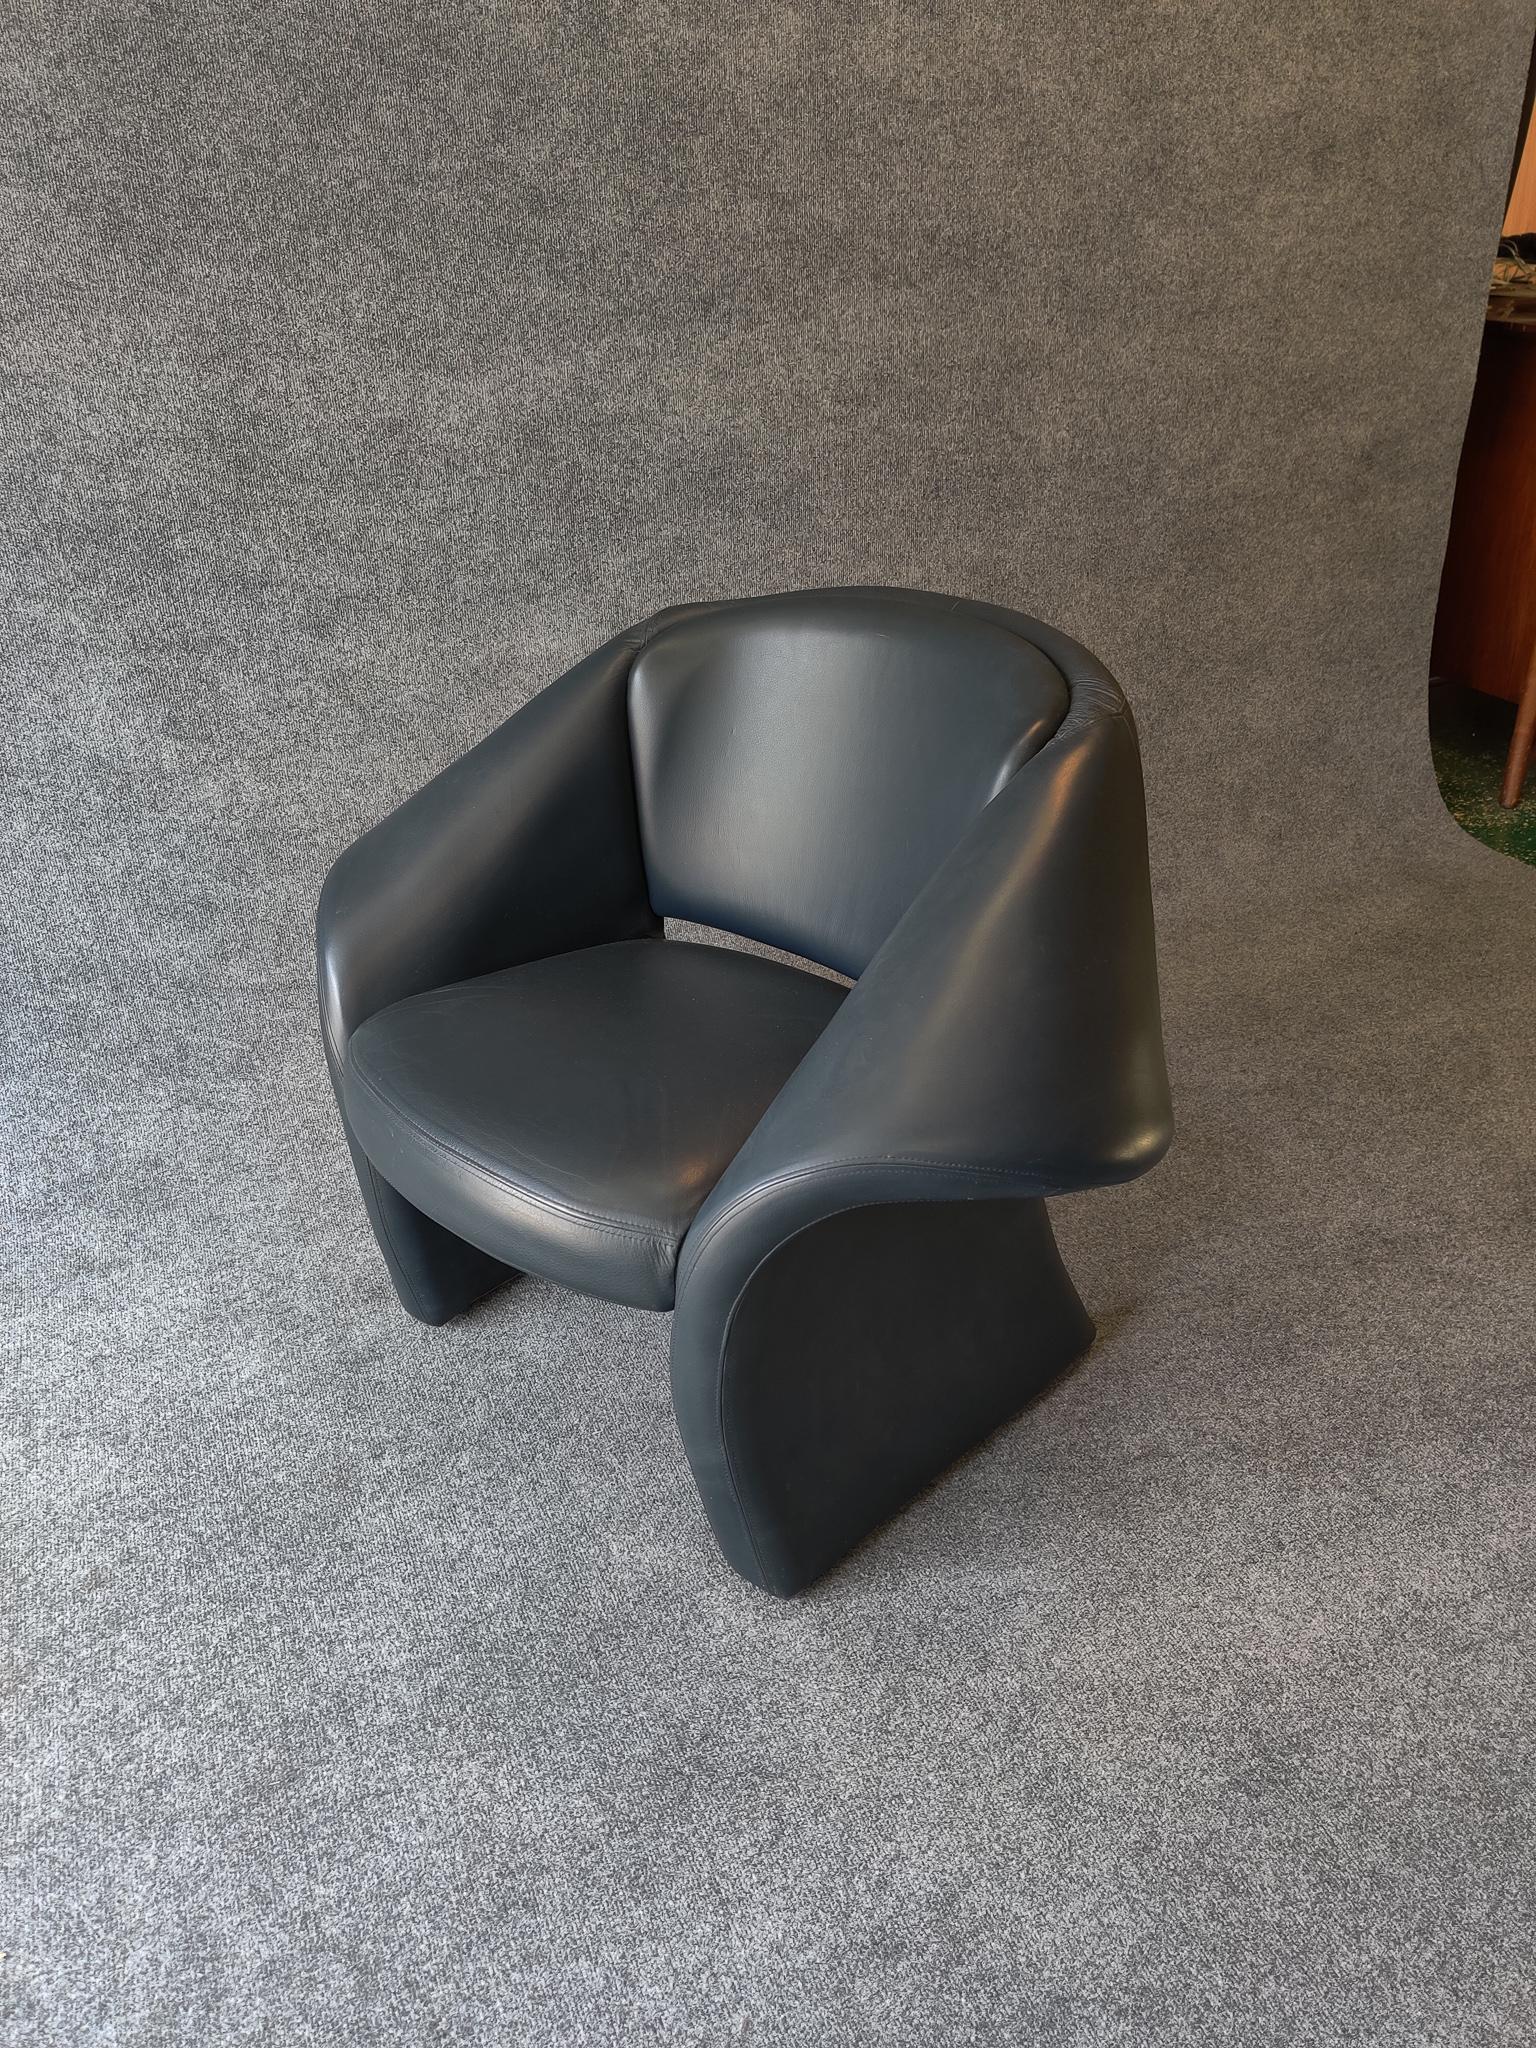 American Post-Modern 1980s, Sculptural Dark Blue Leather Lounge Chair Pierre Paulin Style For Sale